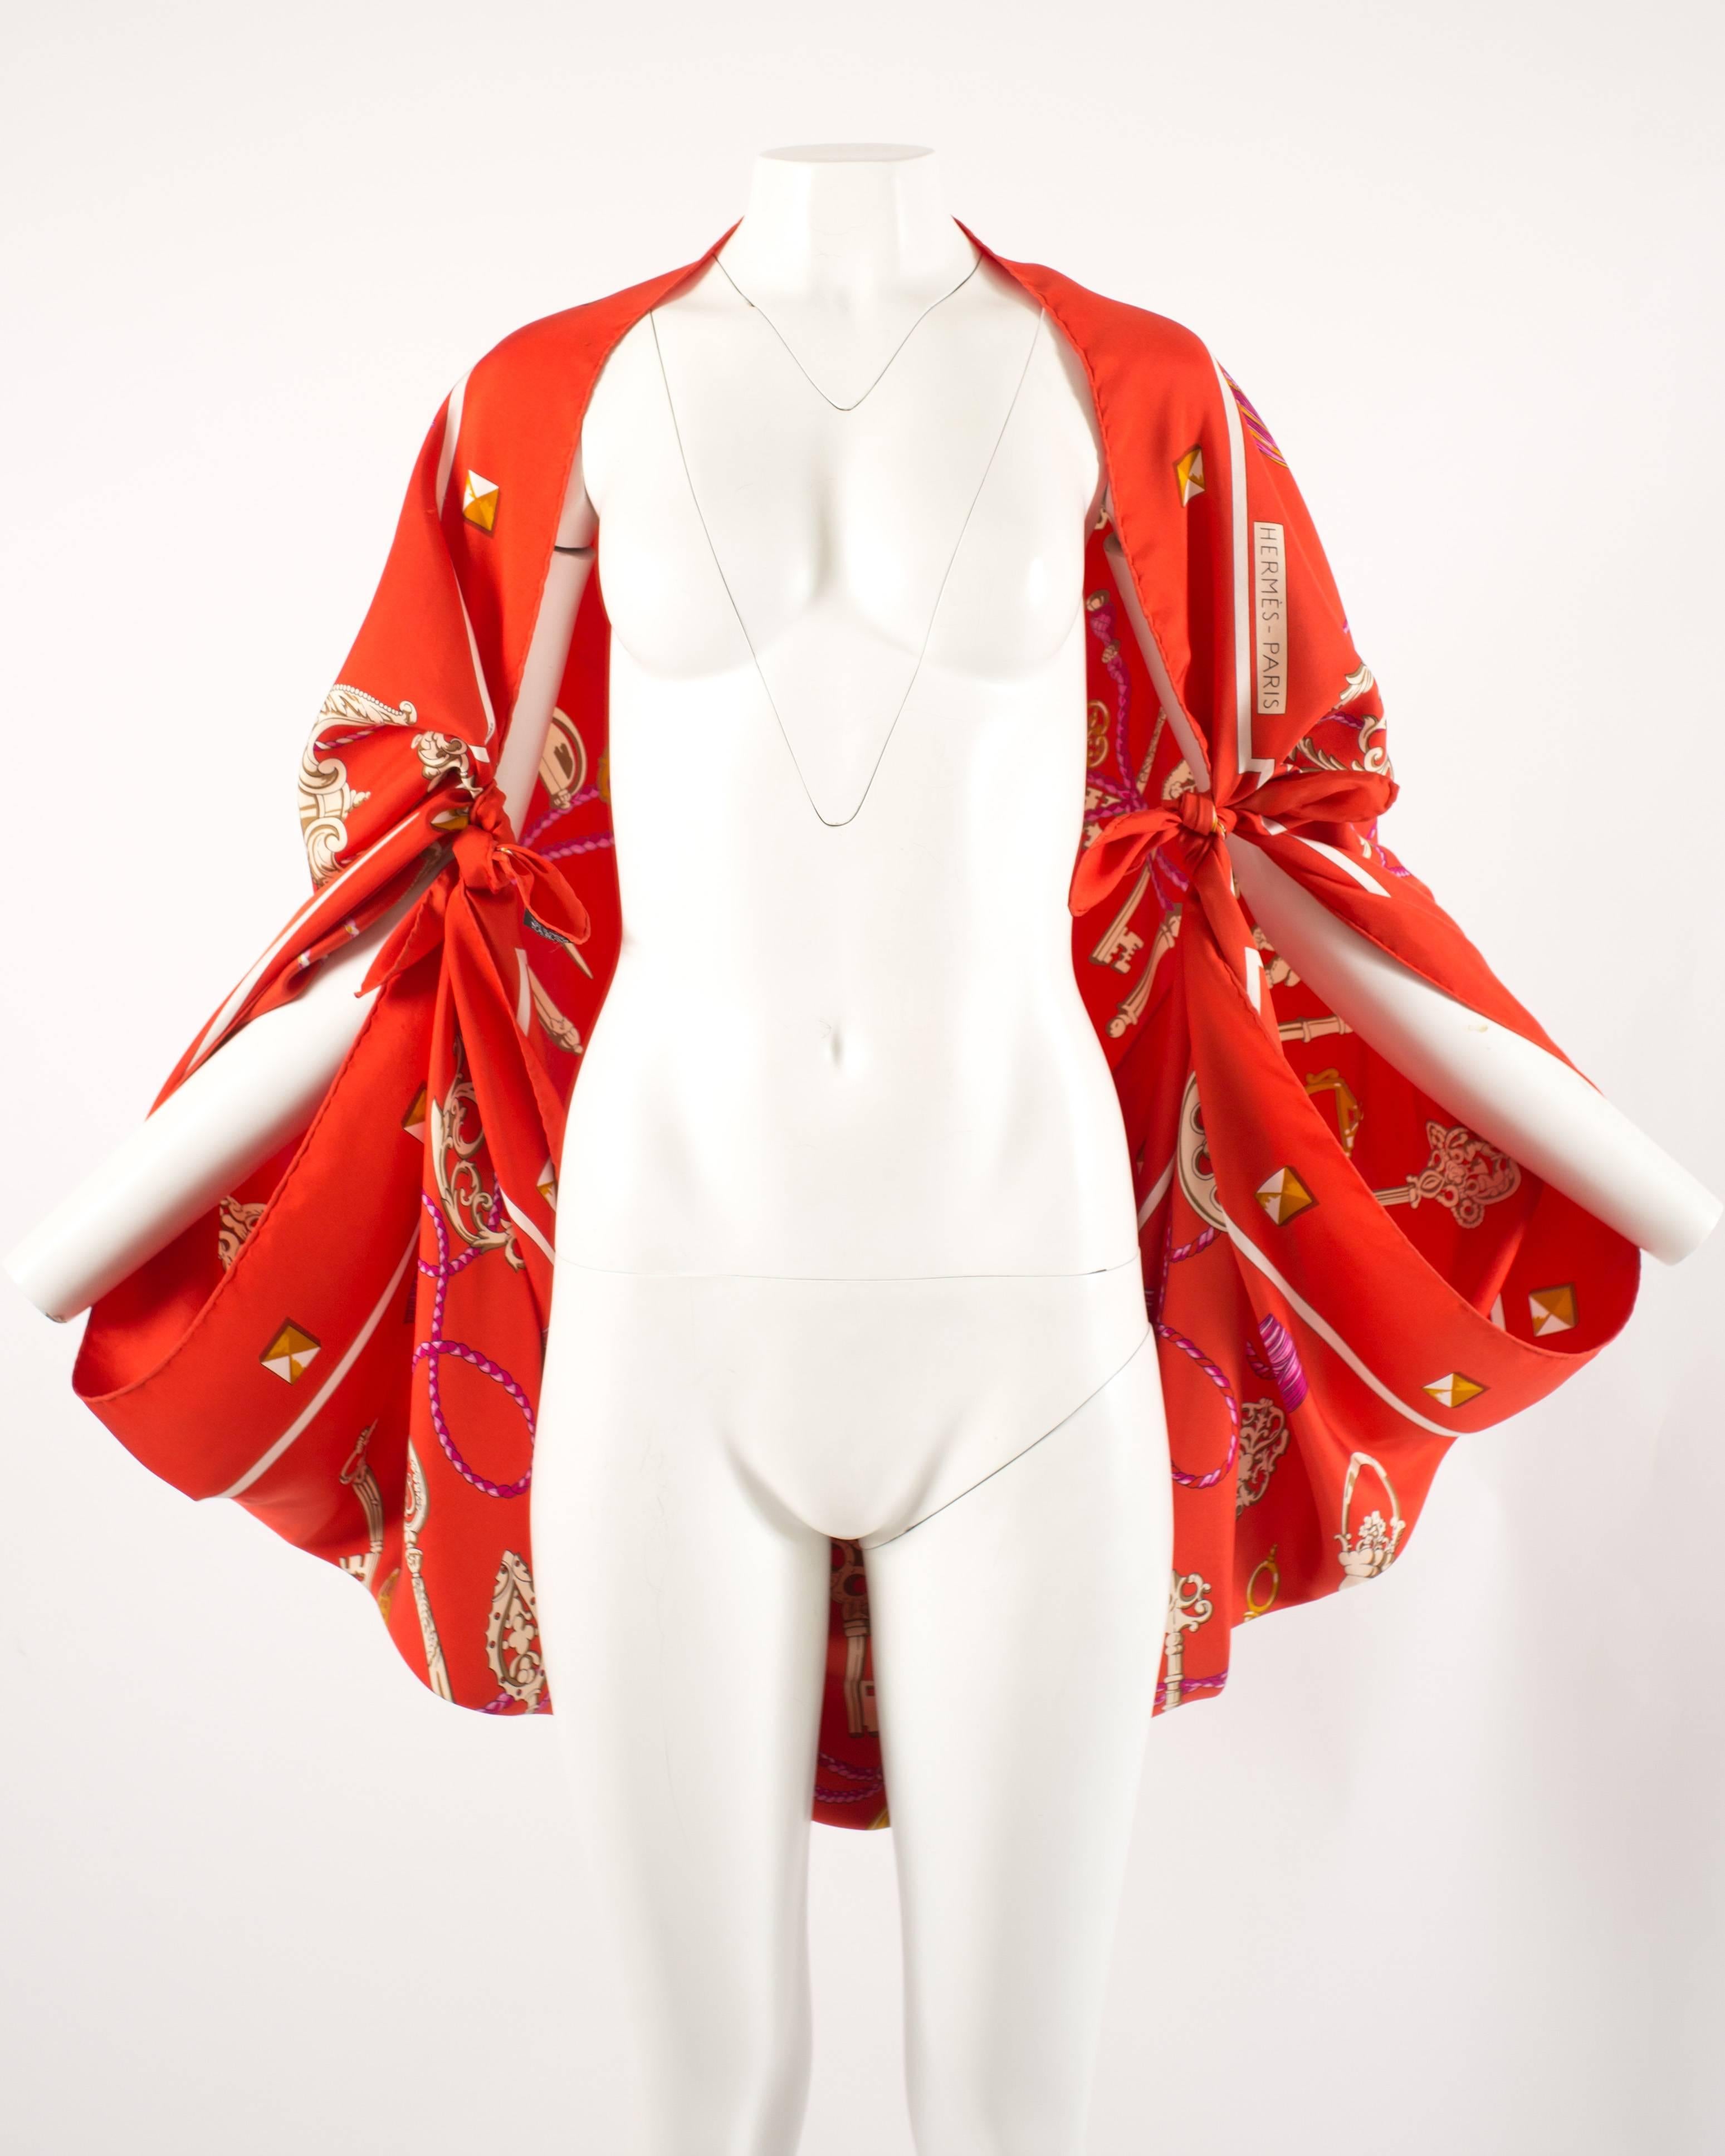 Hermes red Giant Silk Scarf with 'Les Cles' print by artist Cathy Latham 

Versatile design which can be worn as a classic scarf, halter neck dress, bolero jacket, or hobo bag.  

Design history - 